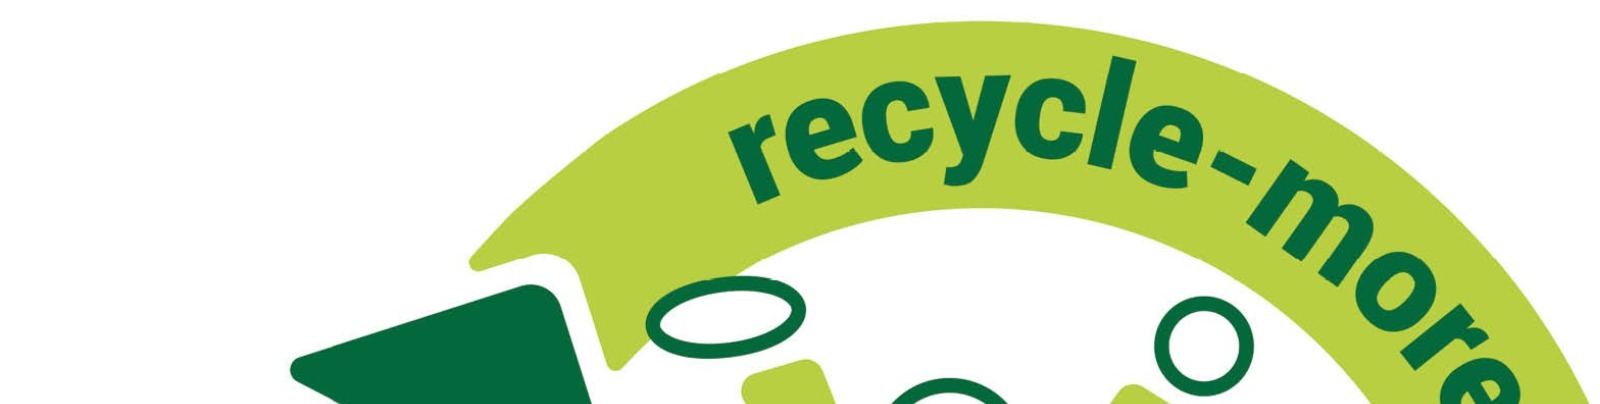  recycle-more Logo